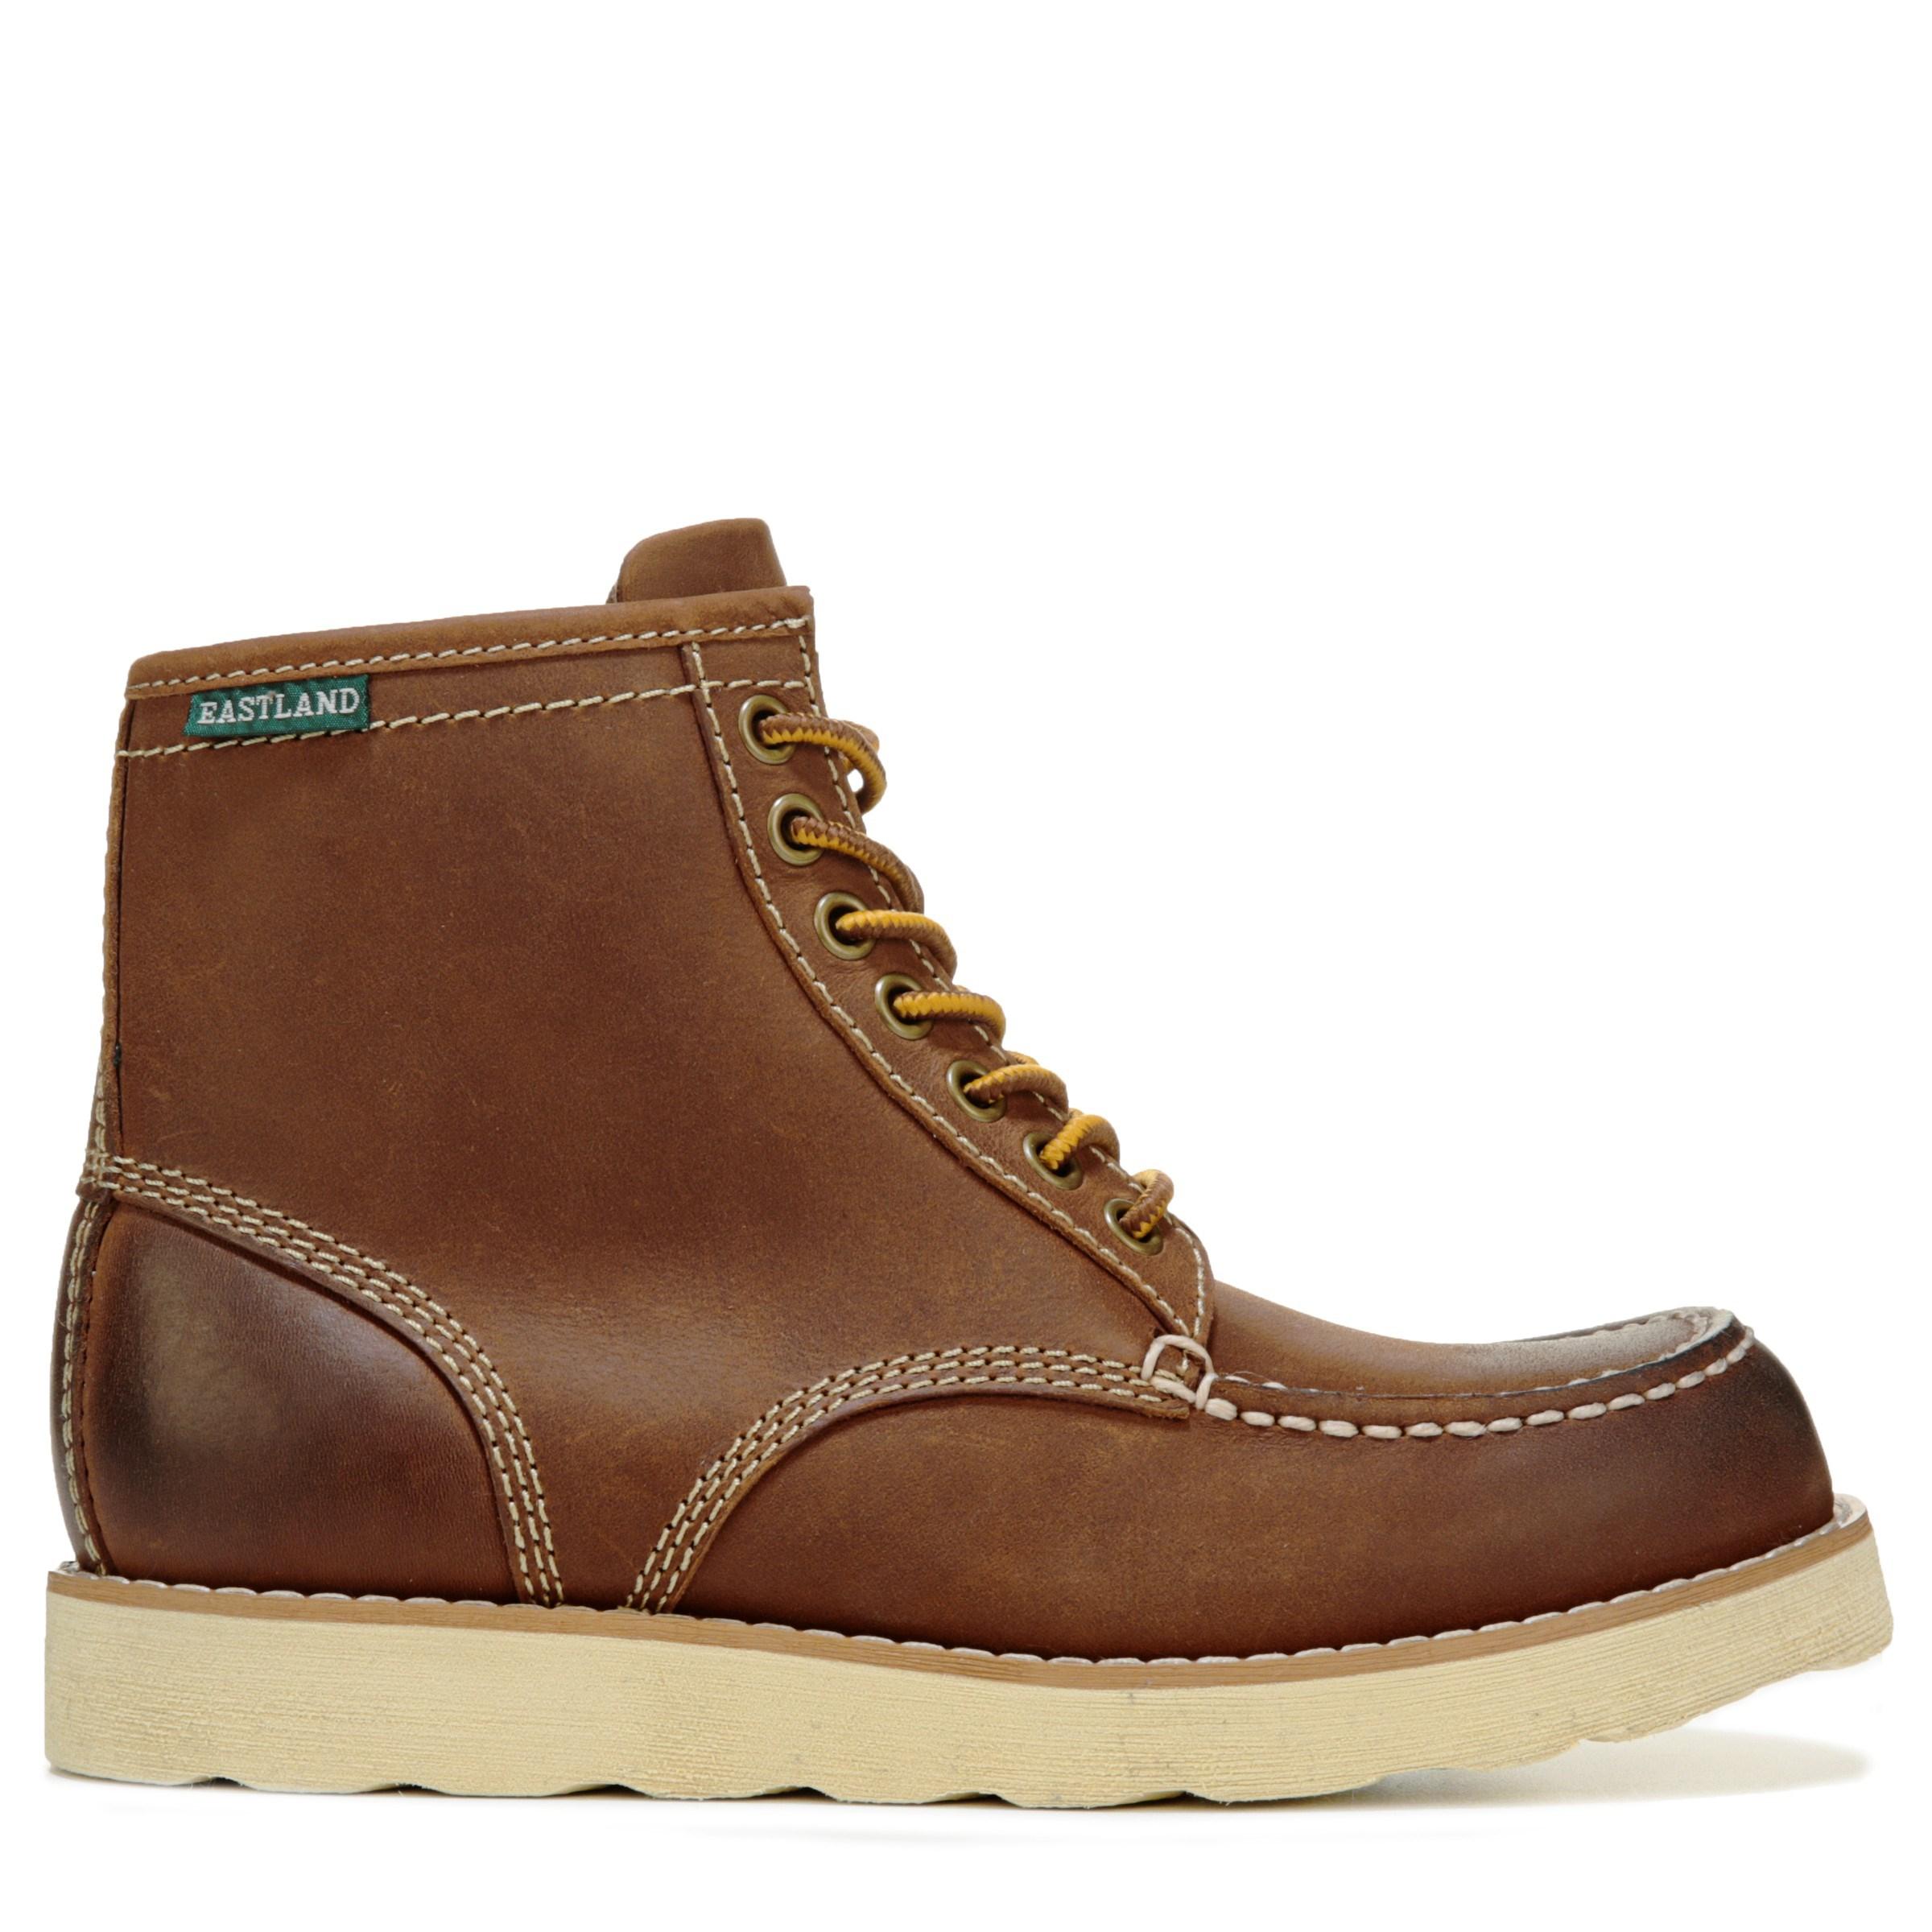 Eastland Leather Lumber Up Boots in Brown for Men - Lyst